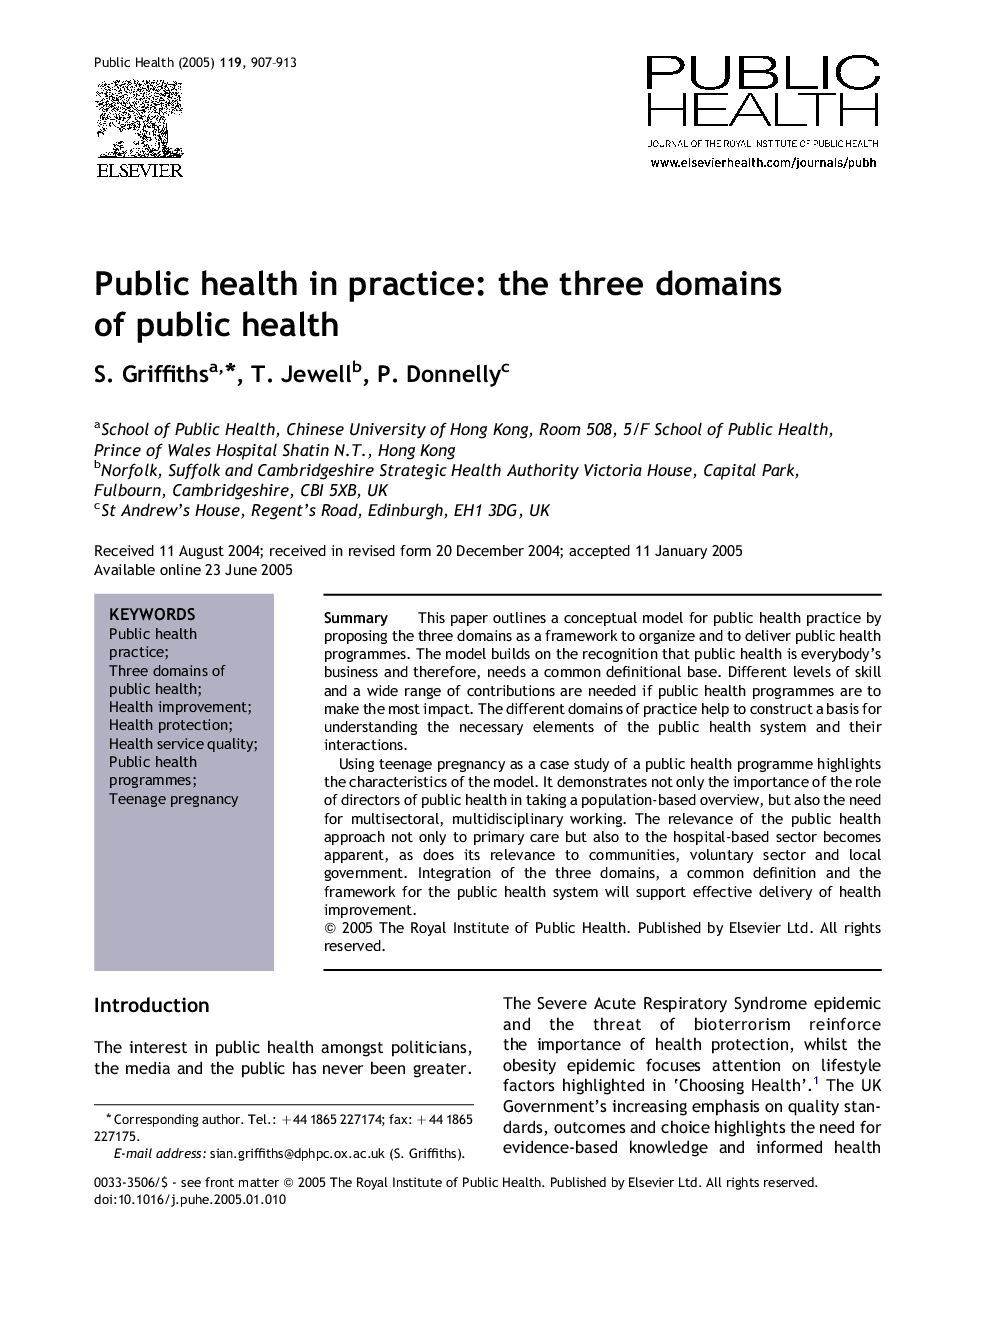 Public health in practice: the three domains of public health